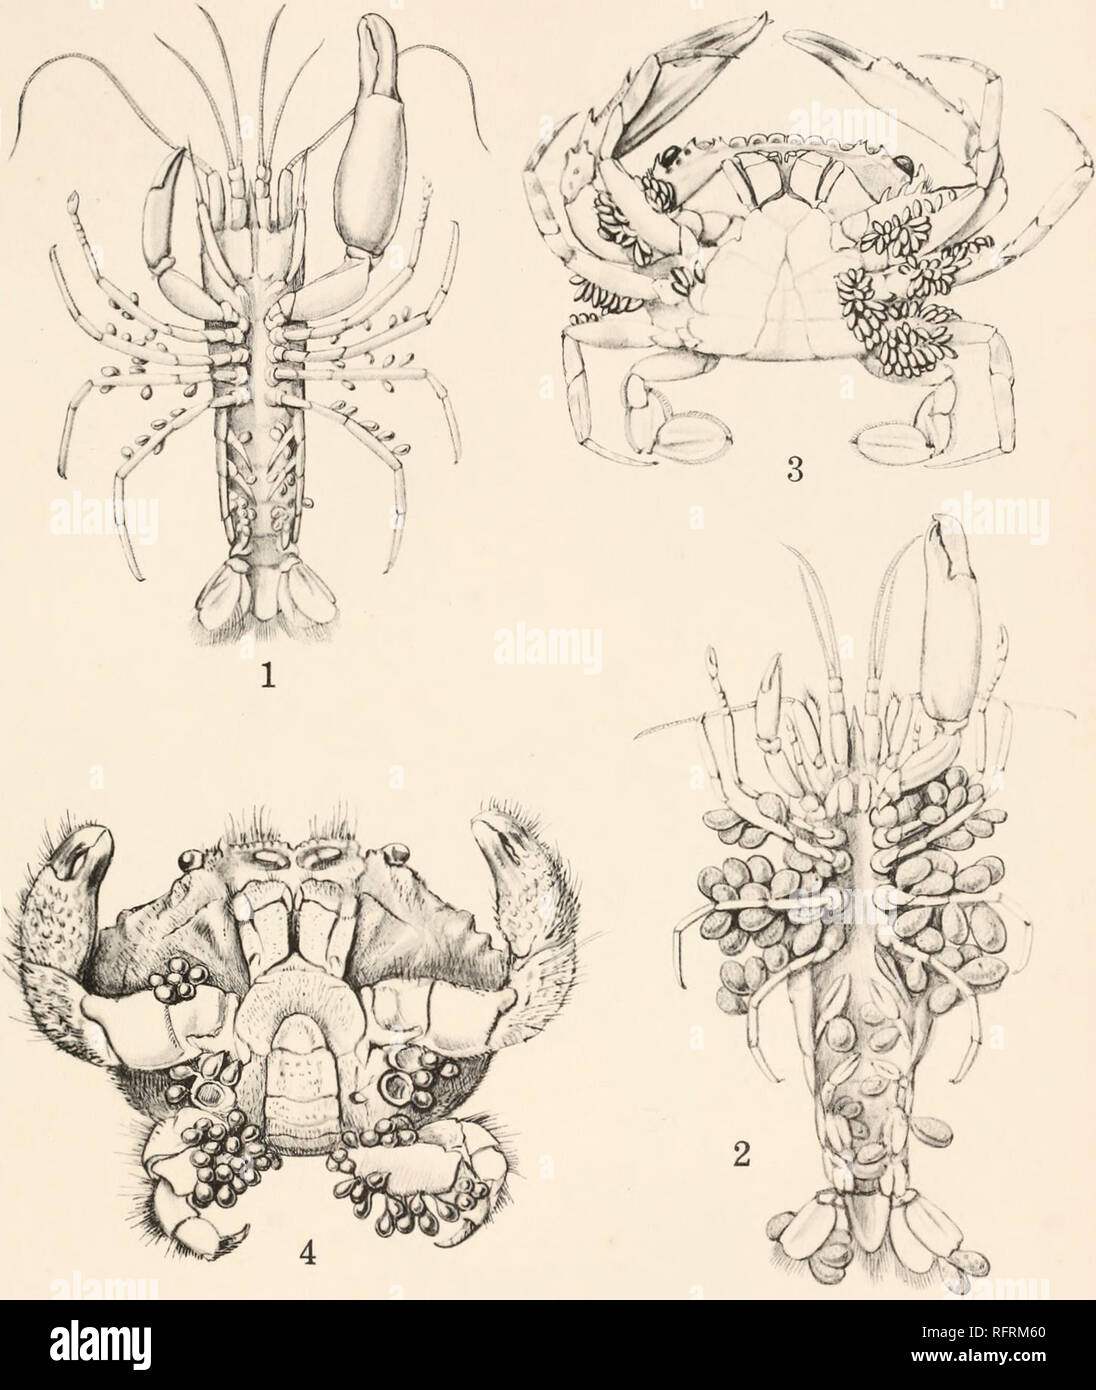 . Carnegie Institution of Washington publication. F. A. POTTS PLATE 1. Fig. 1. Thompsonia on Synalpheus brucei. Young external sacs on the abdominal and thoracic appendages, x 3. Fig. 2. The same at a later stage. The external sacs now contain Cypris larvae which are roughly indicated within, x 3. Fig. 3. Thompsonia on Thalamita prymna. To show the very large number of external sacs occurring on this specimen. Natural size. Fig. 4. Thompsonia on Actasa ruppellii. External sacs pear-shaped, x 2. The first three specimens figured are from Murray Island, the fourth from South Africa.. Please note Stock Photo